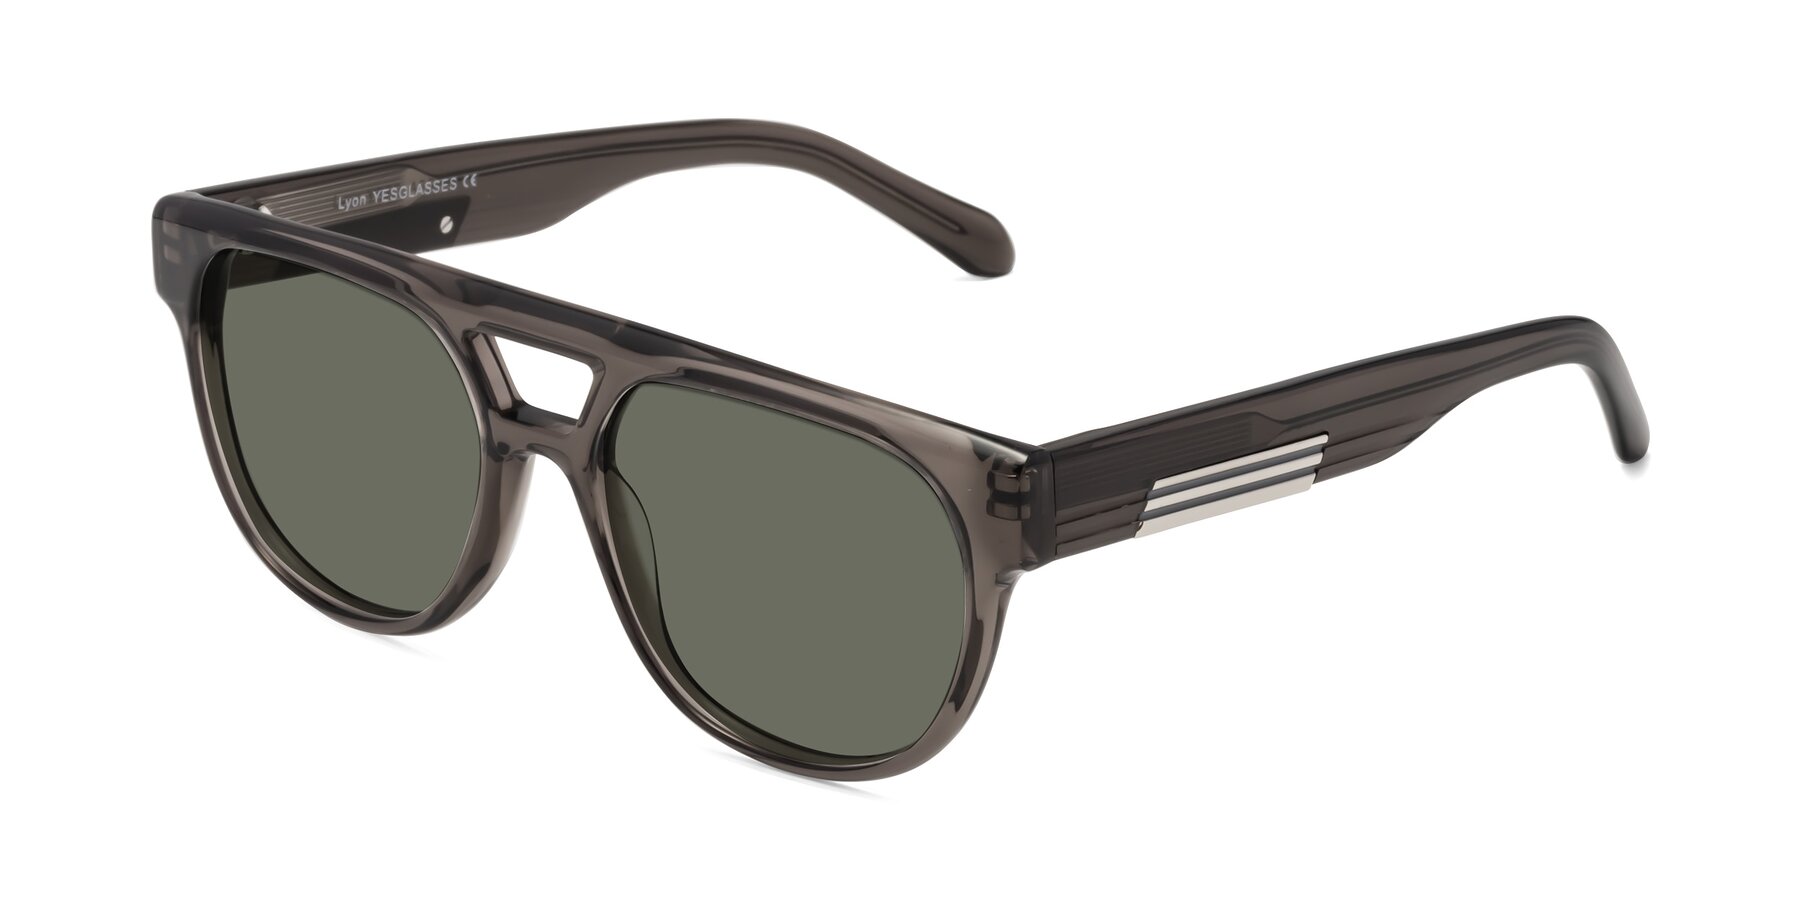 Angle of Lyon in Charcoal Gray with Gray Polarized Lenses